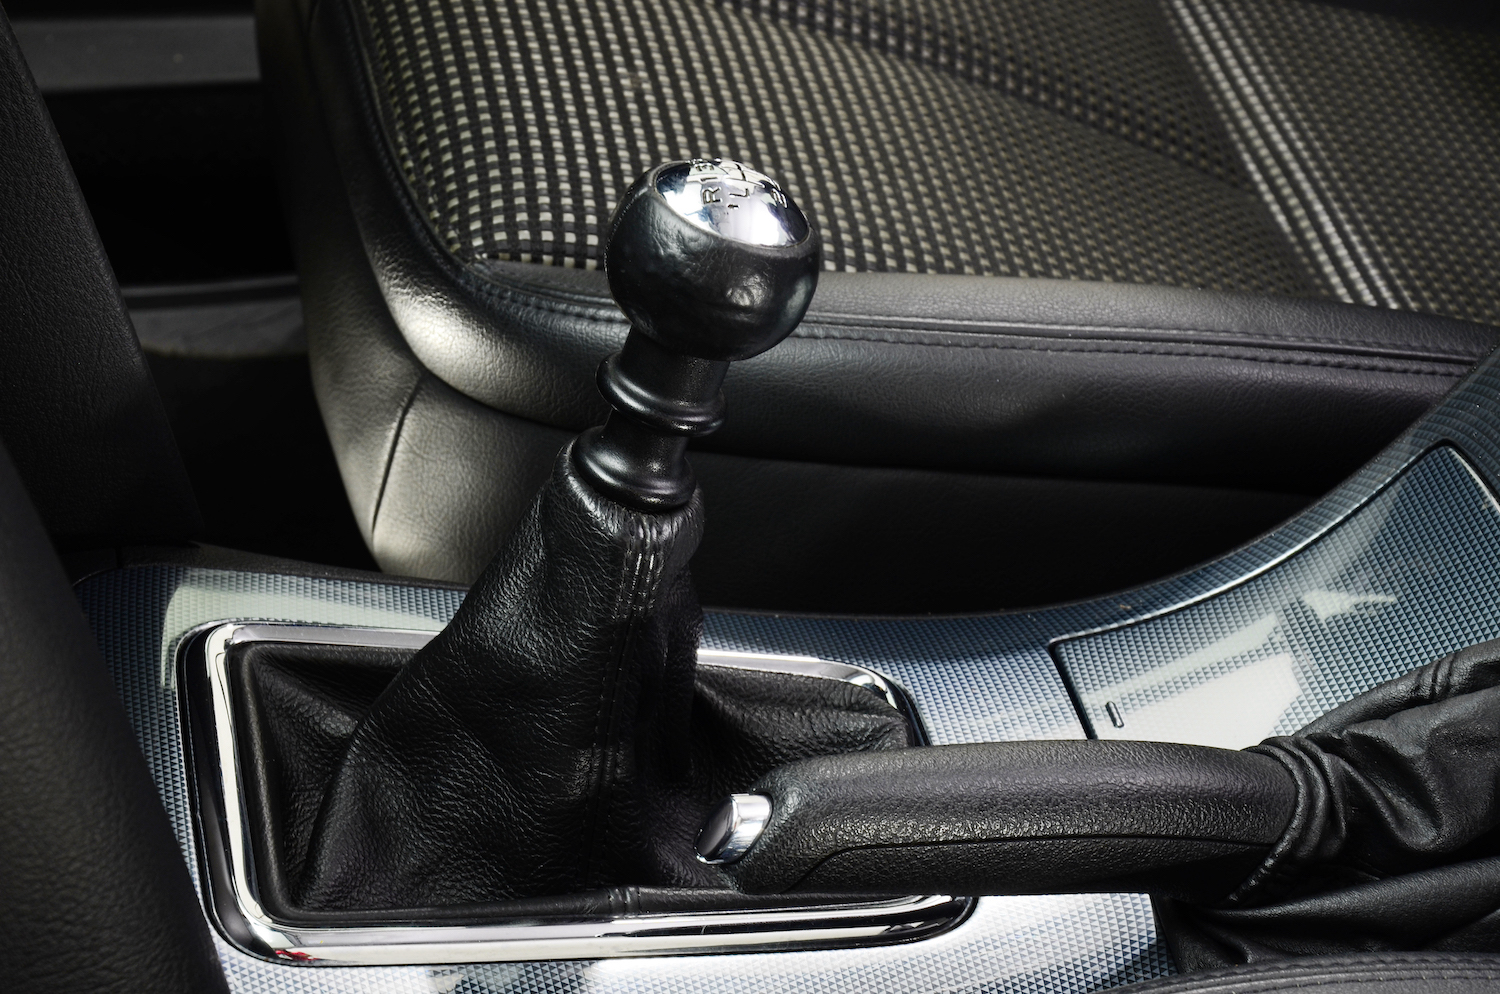 2004 Peugeot 407 5-speed manual shifter